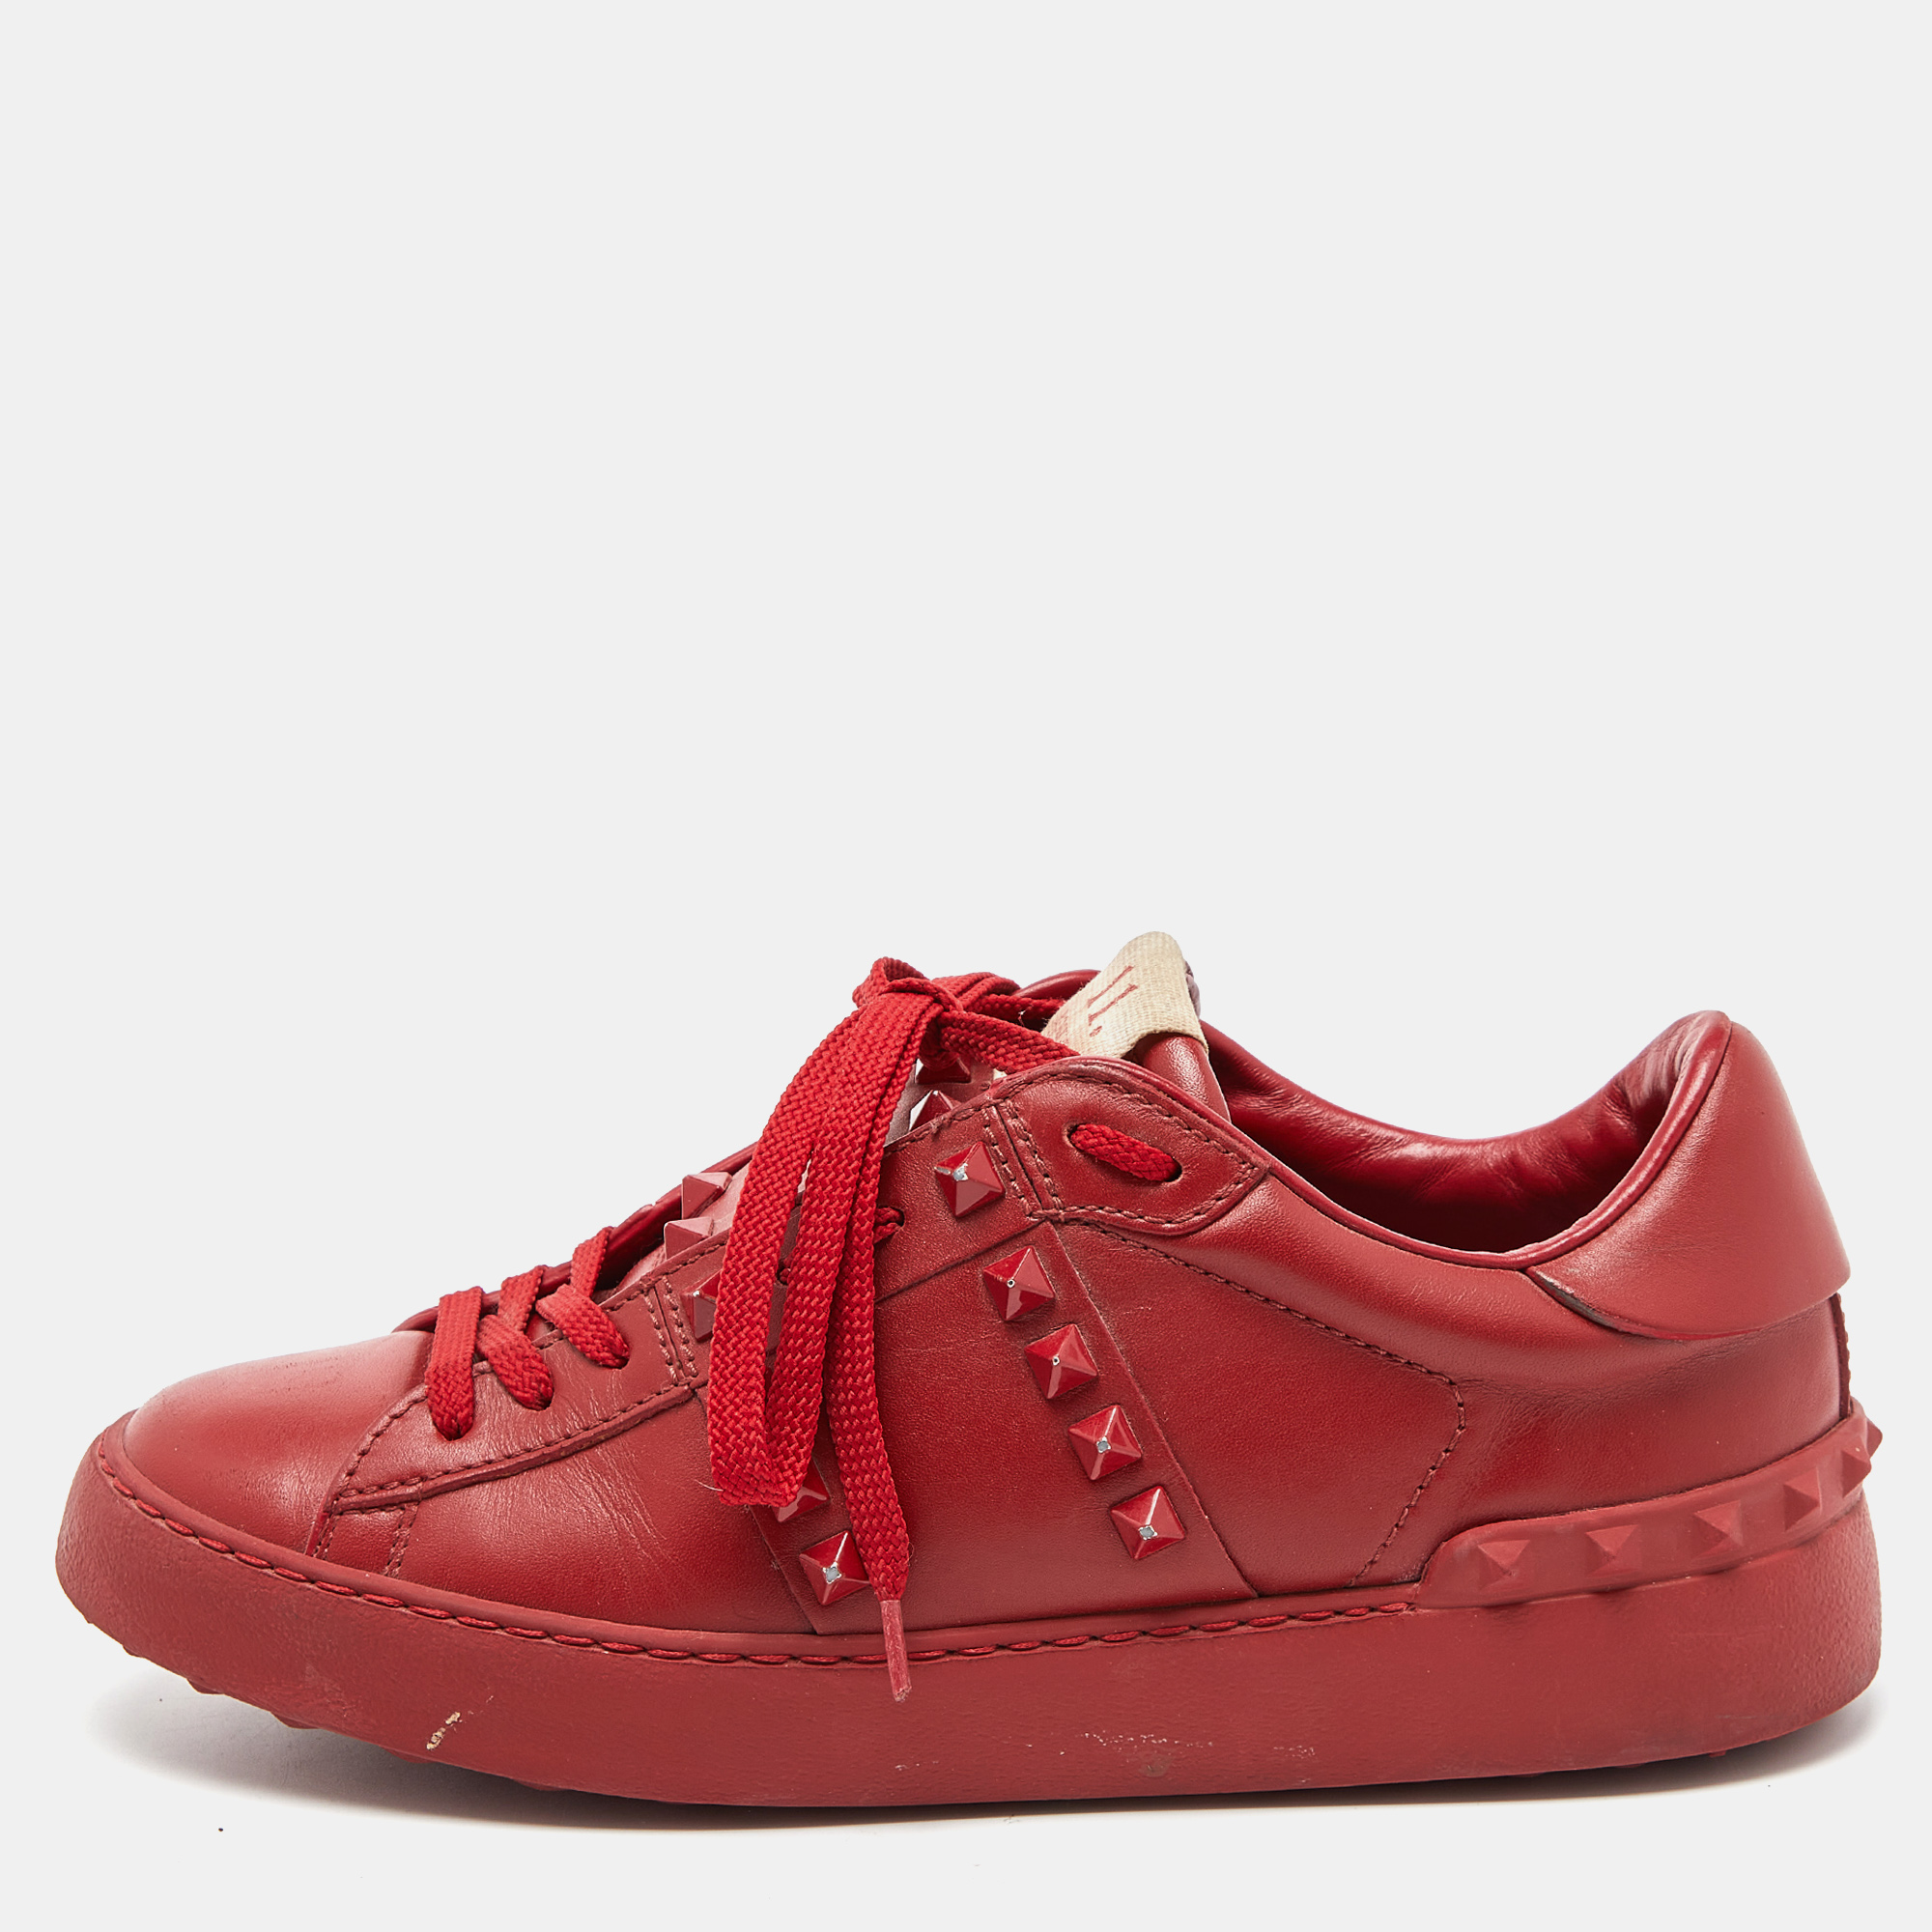 Valentino Red Leather Rockstud Untitled Sneakers Size 37